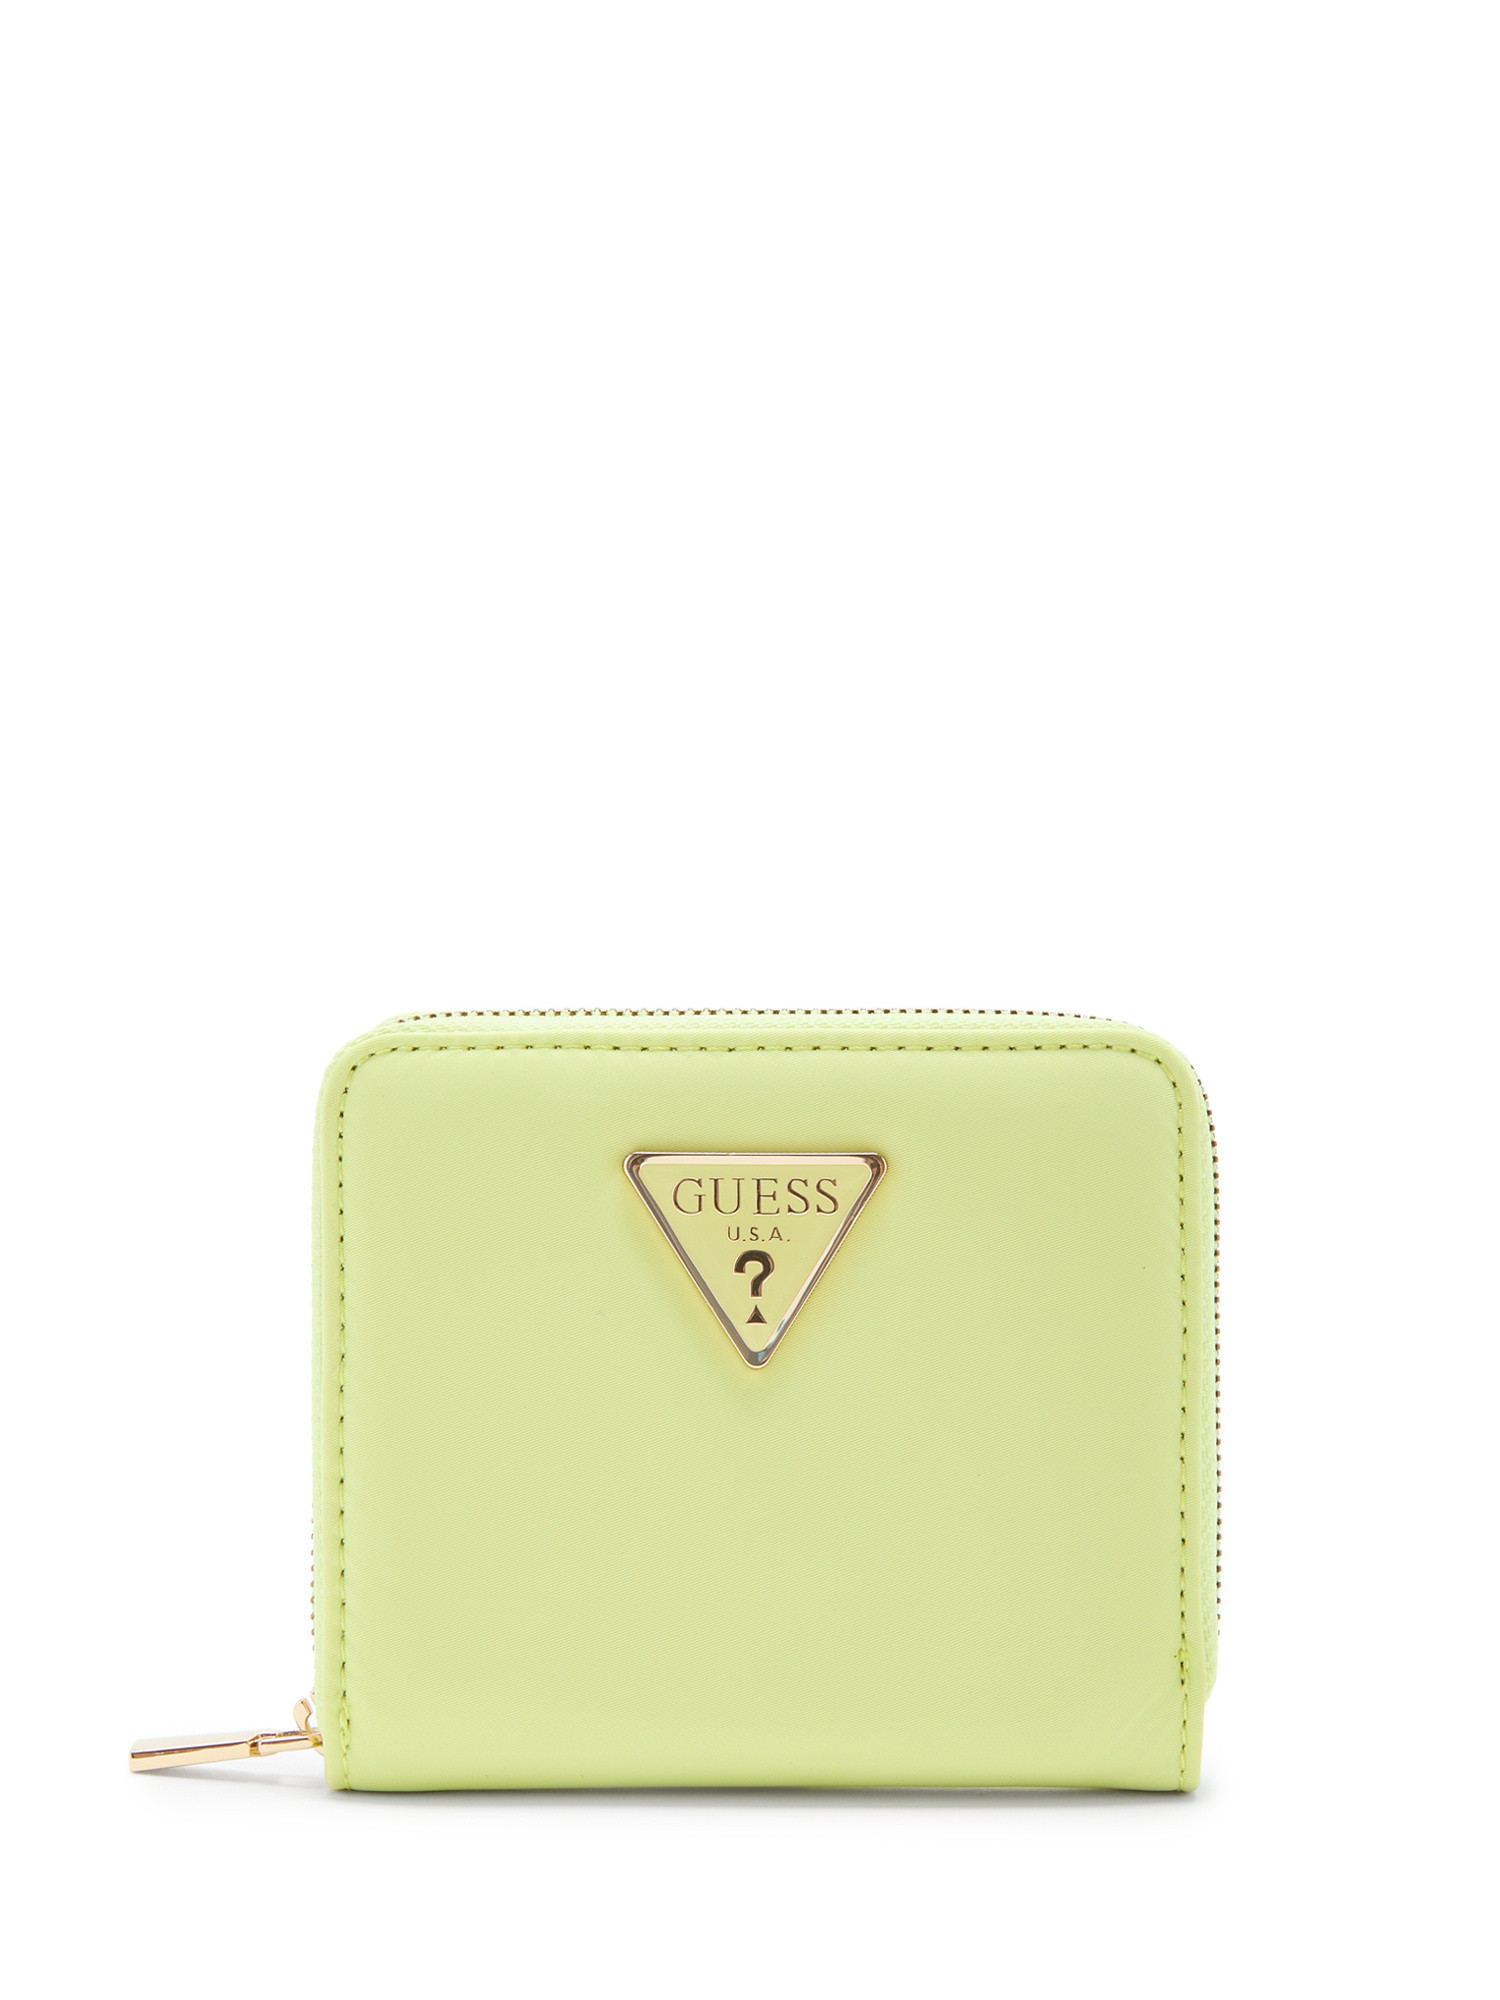 Guess - Gemma eco mini wallet, Light Yellow, large image number 0